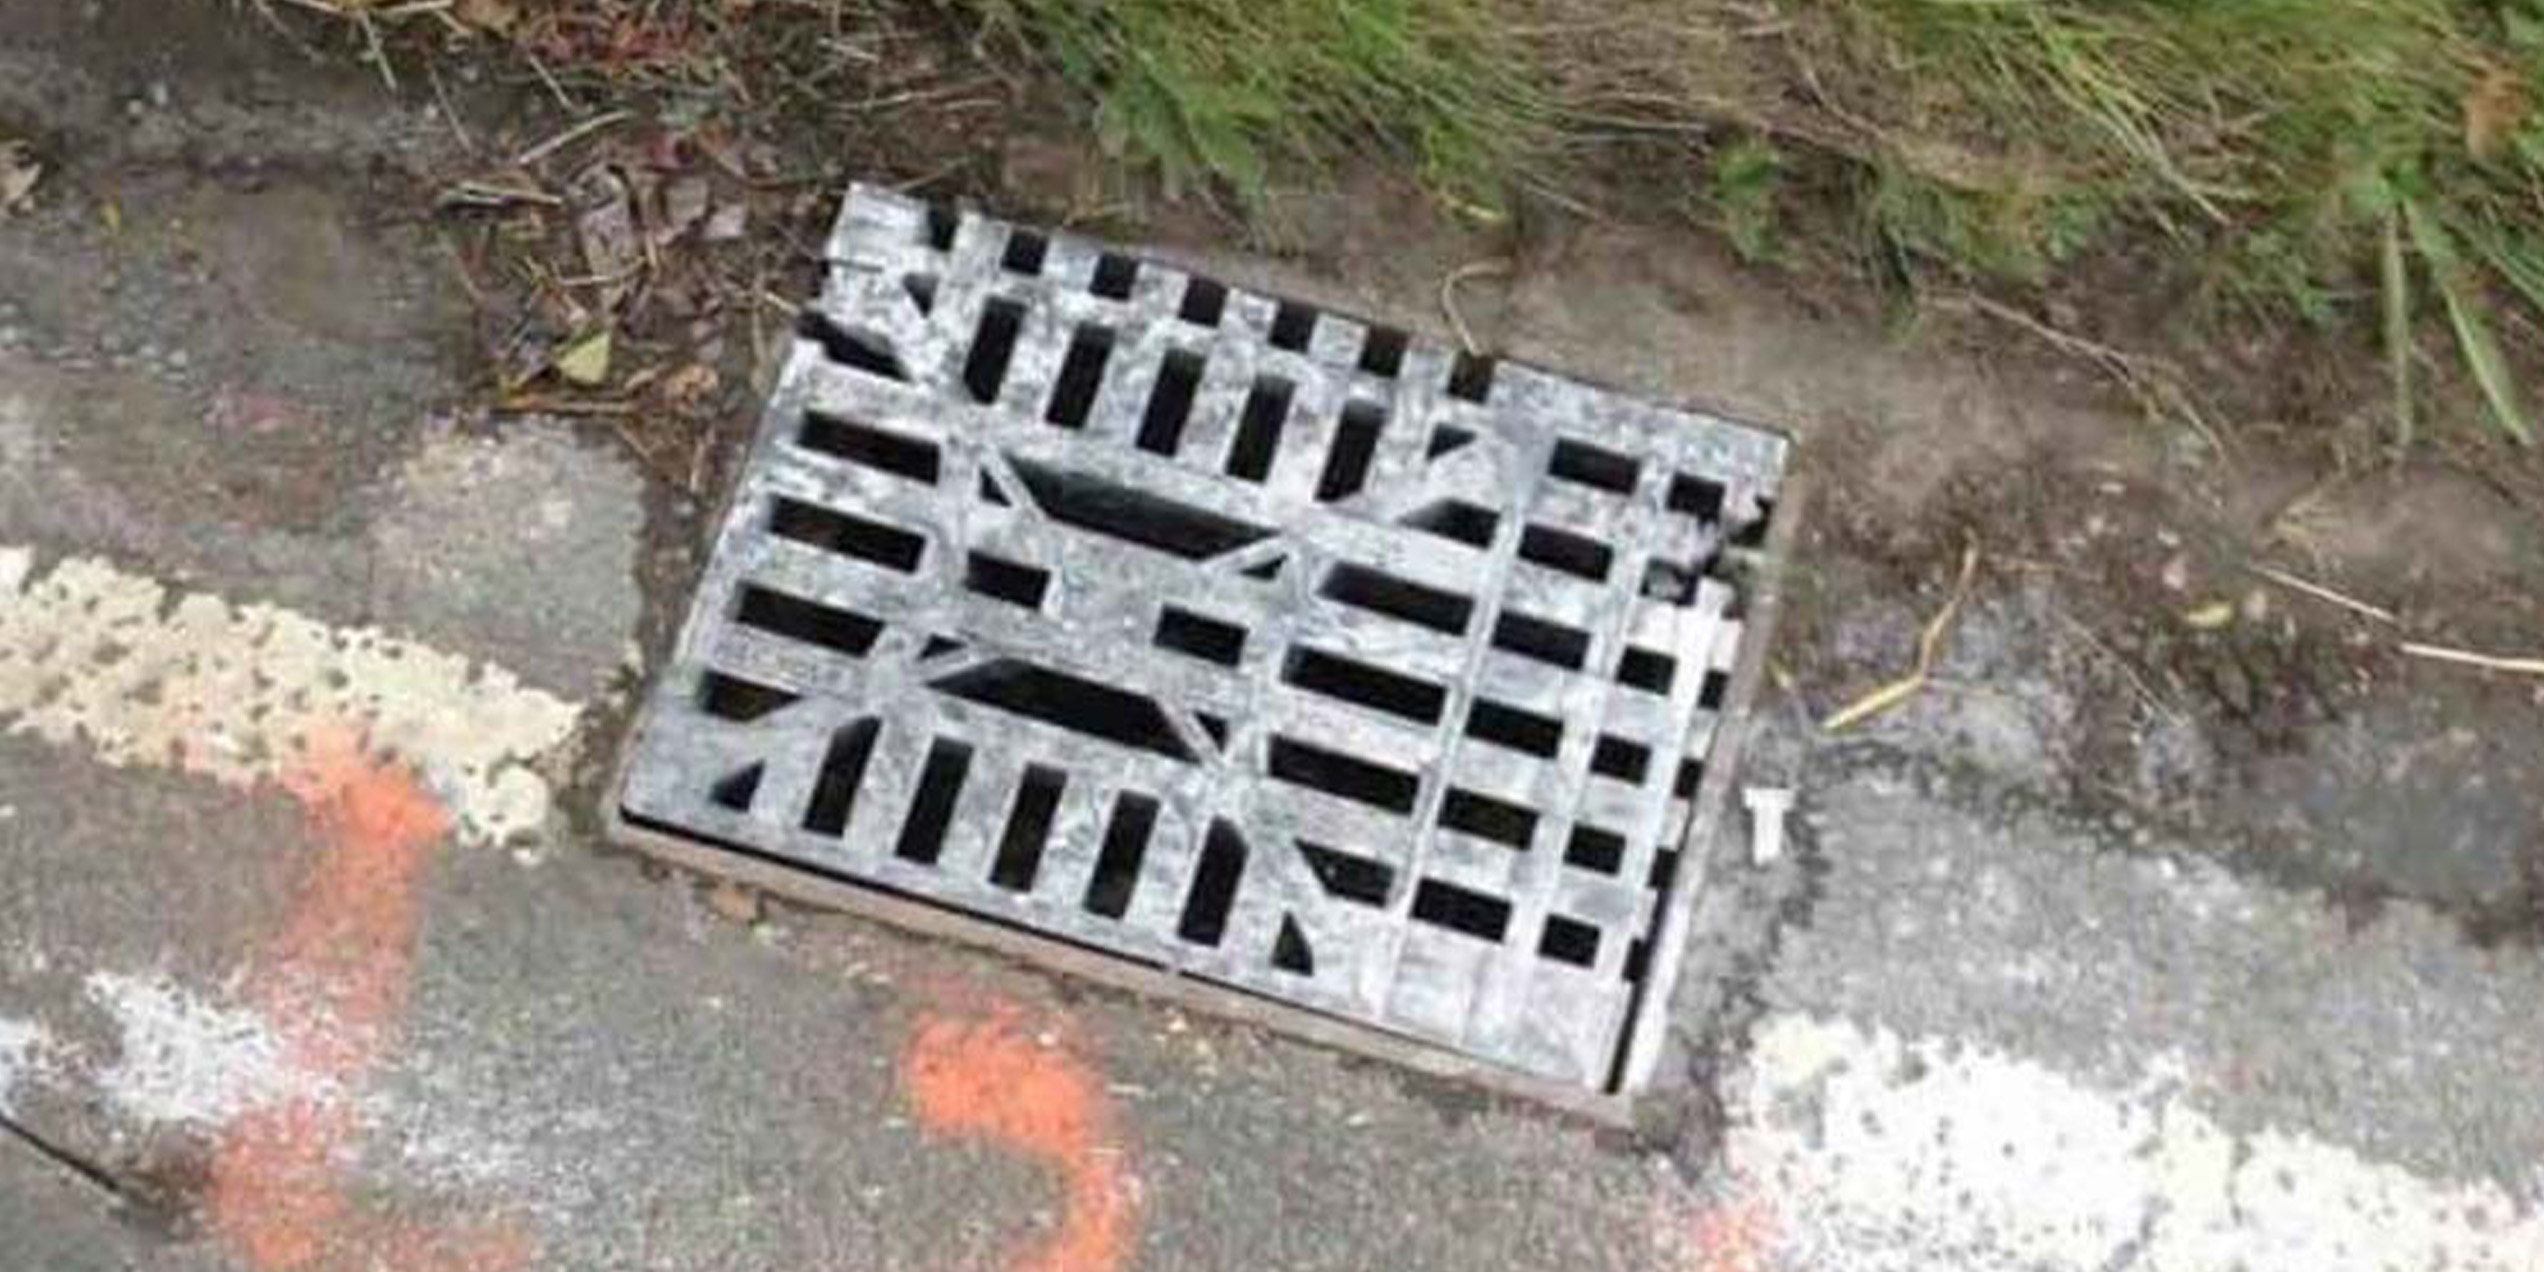 Multigrate used as a gully grate cover at the side of a road